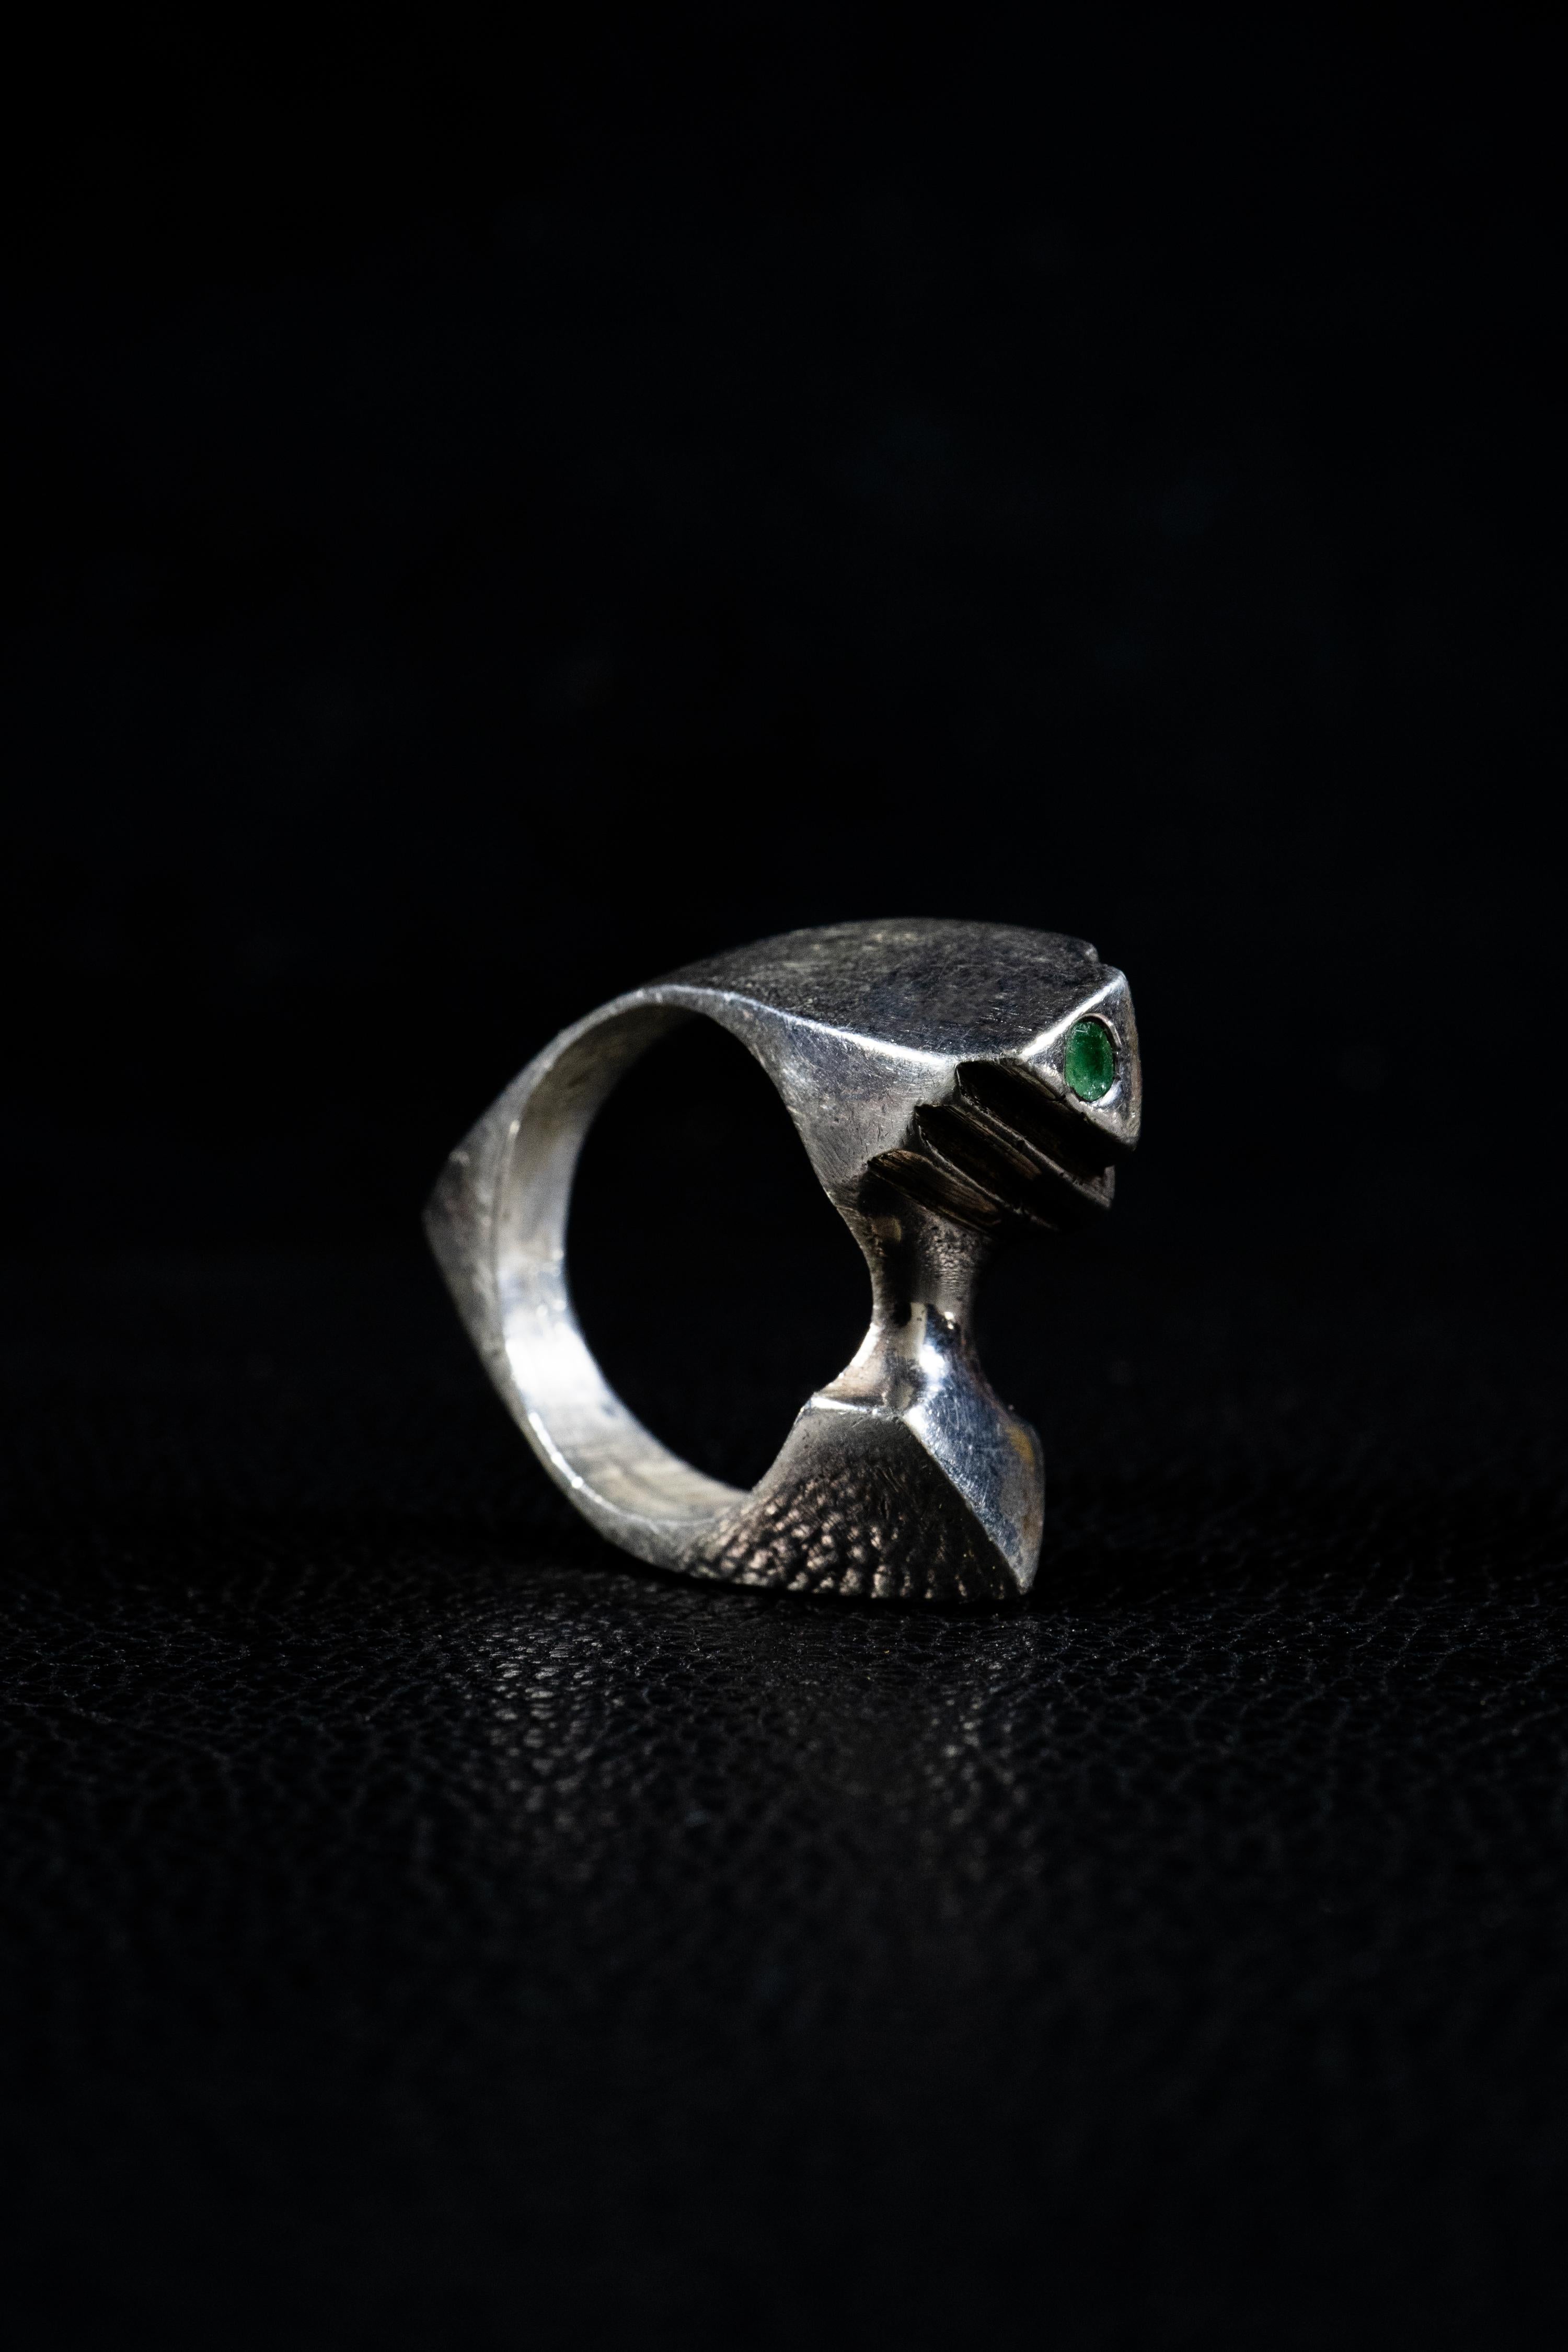 Pyramid is a handcrafted ring by Ken Fury that is hand-carved and cast. The ring showcases the intricate design of a pyramid that interconnects at multiple angles around the ring with a Genuine Emerald stone at the top.

Available in 10K Solid White